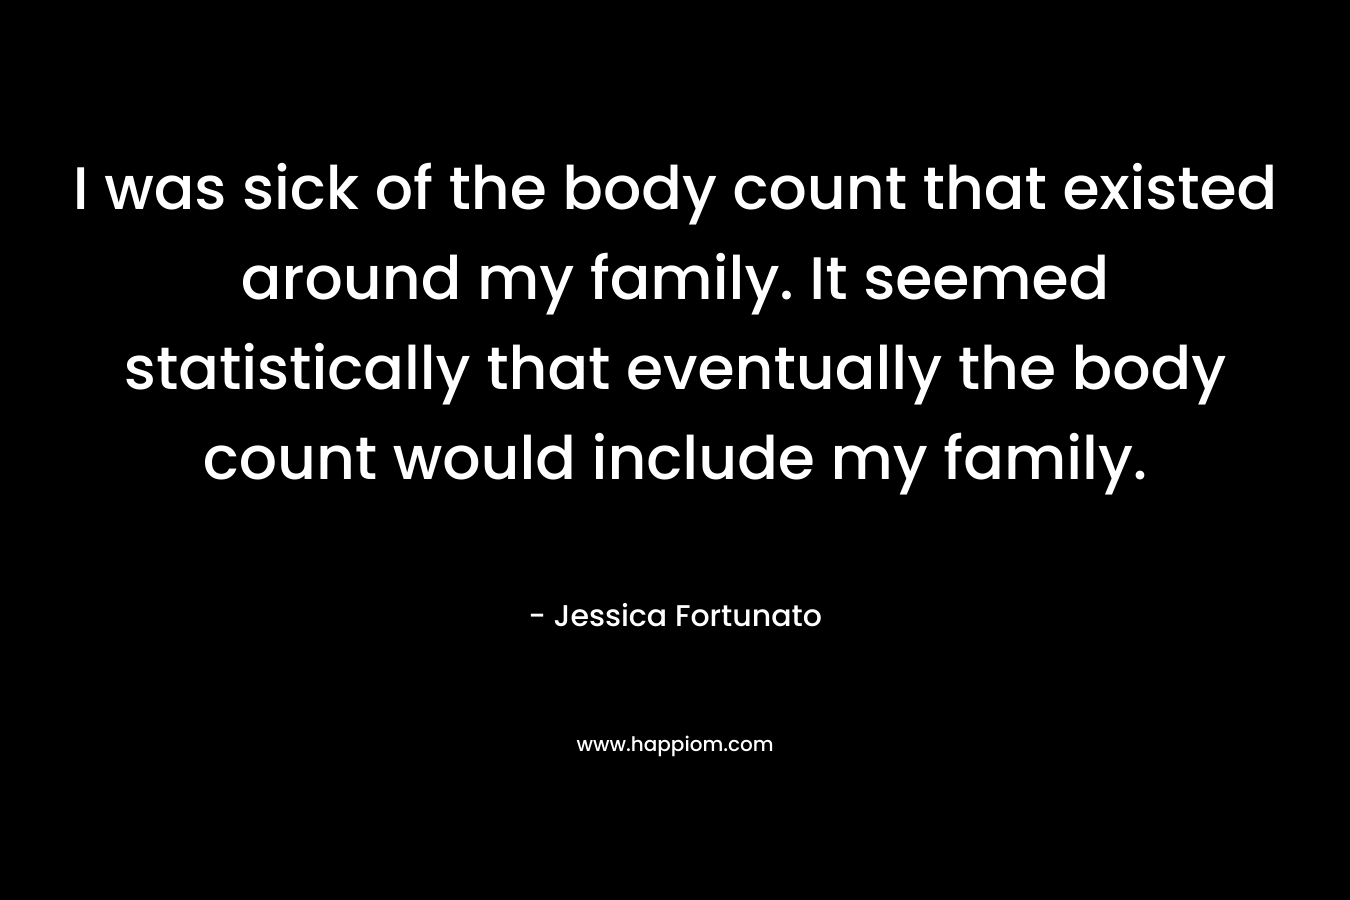 I was sick of the body count that existed around my family. It seemed statistically that eventually the body count would include my family.